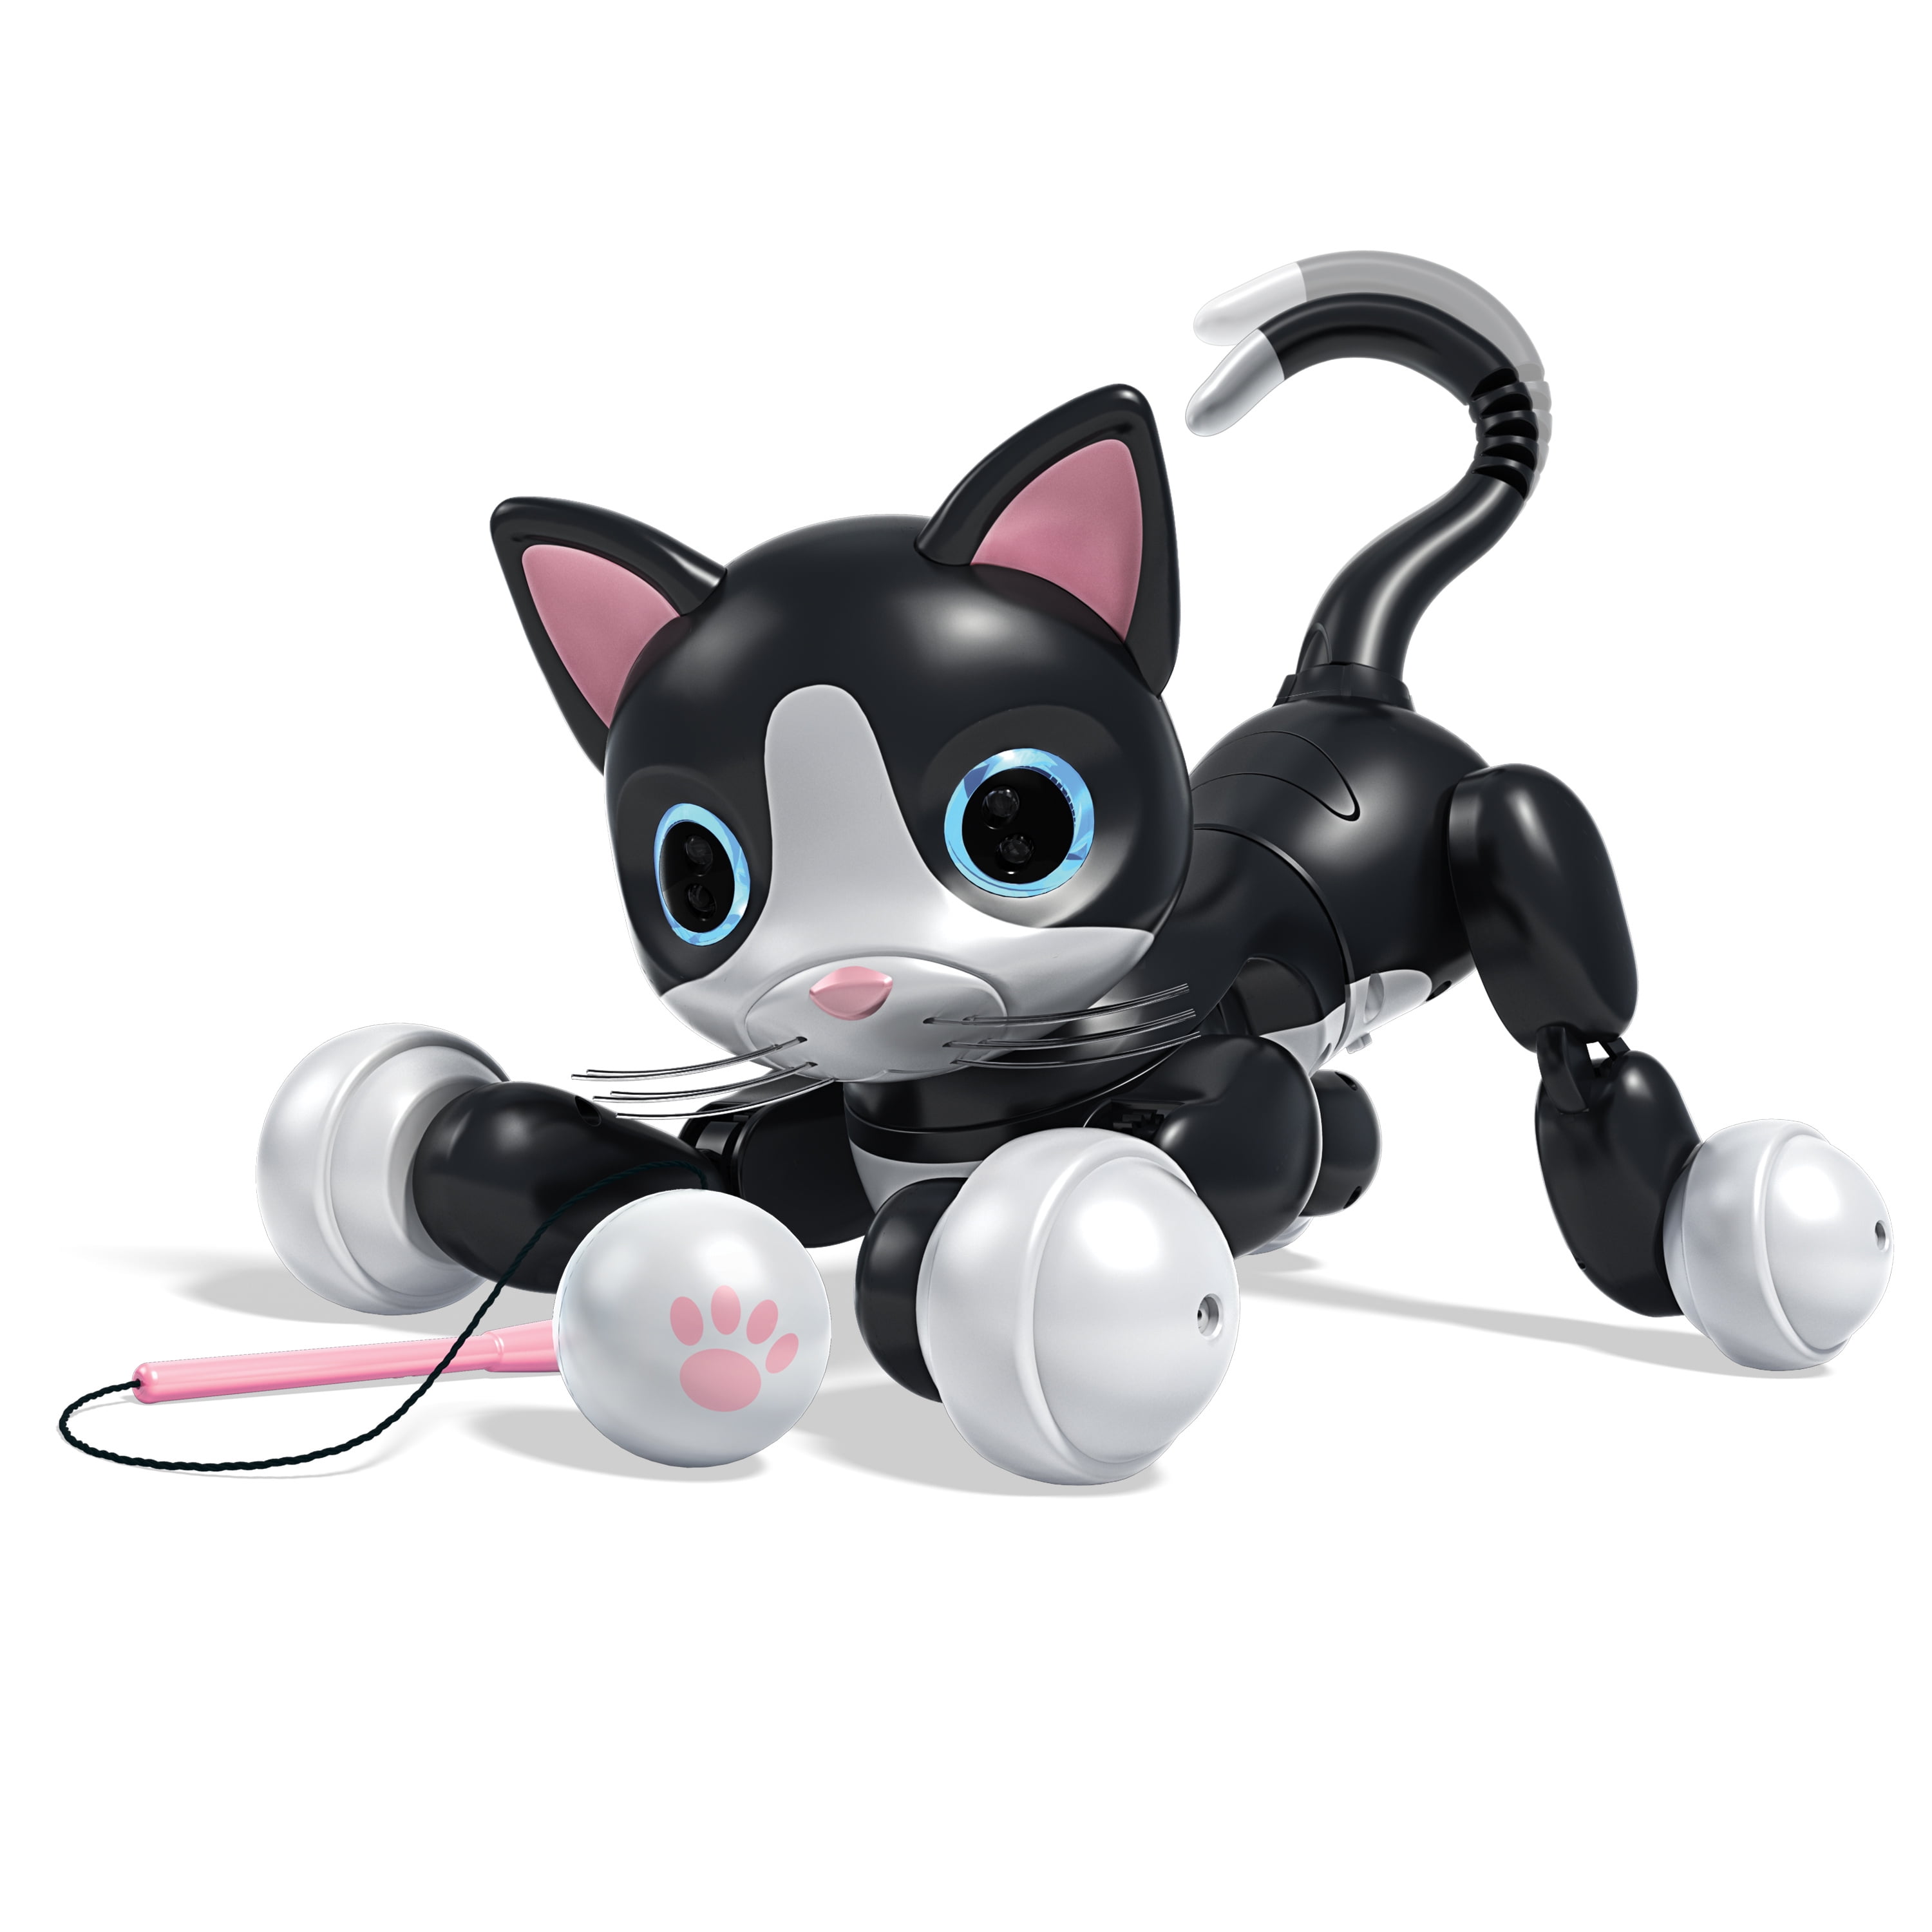 Zoomer Kitty Interactive Robotic Black & White Cat By Spin Master NO TAIL! 